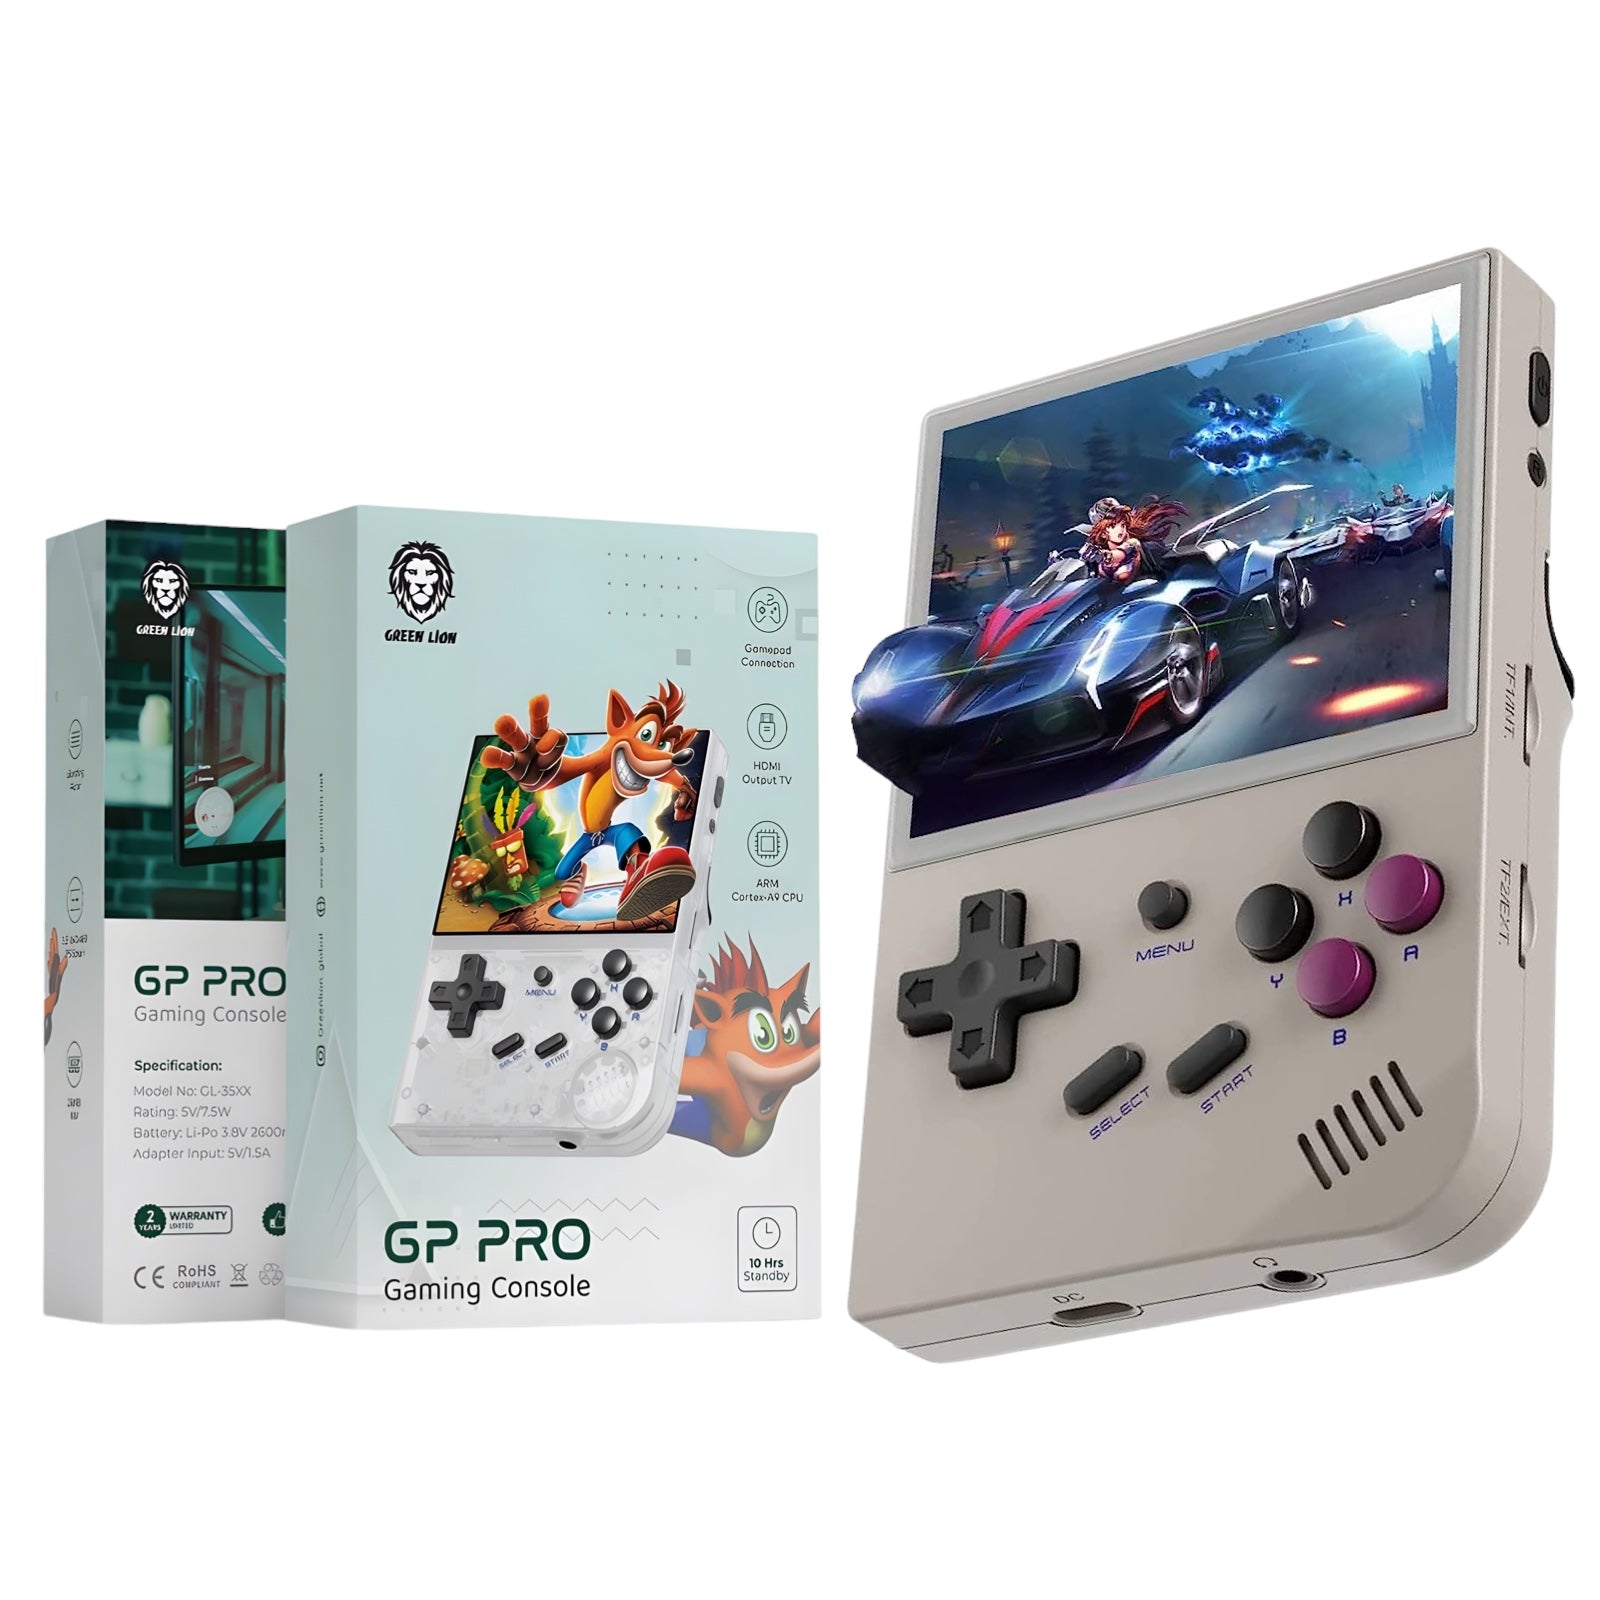 GP PRO gaming console 5000 games - JawdaTop